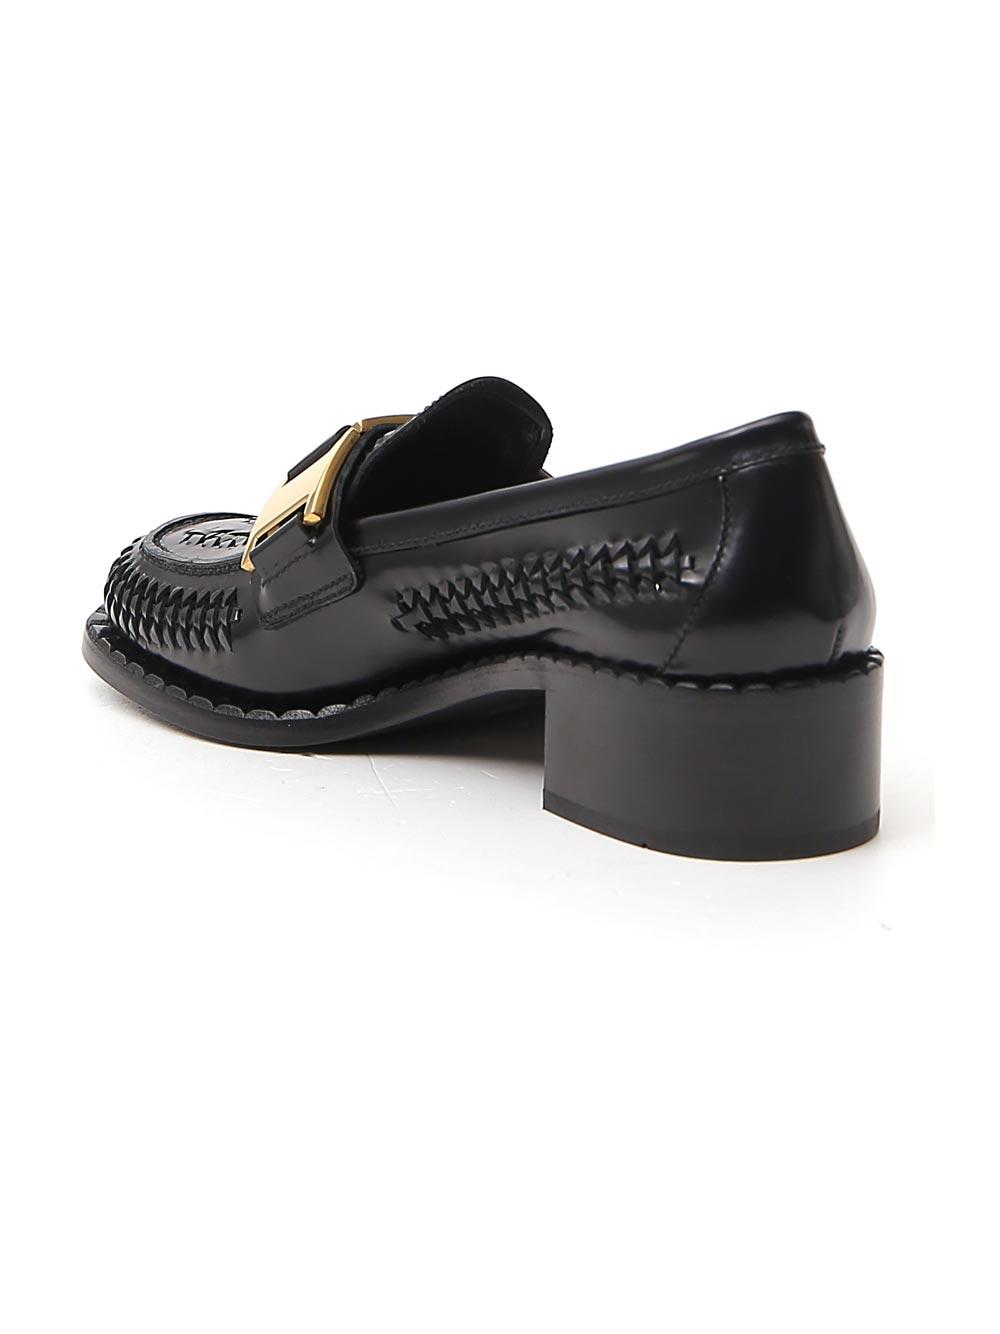 Prada Leather Braided Loafers in Black - Lyst